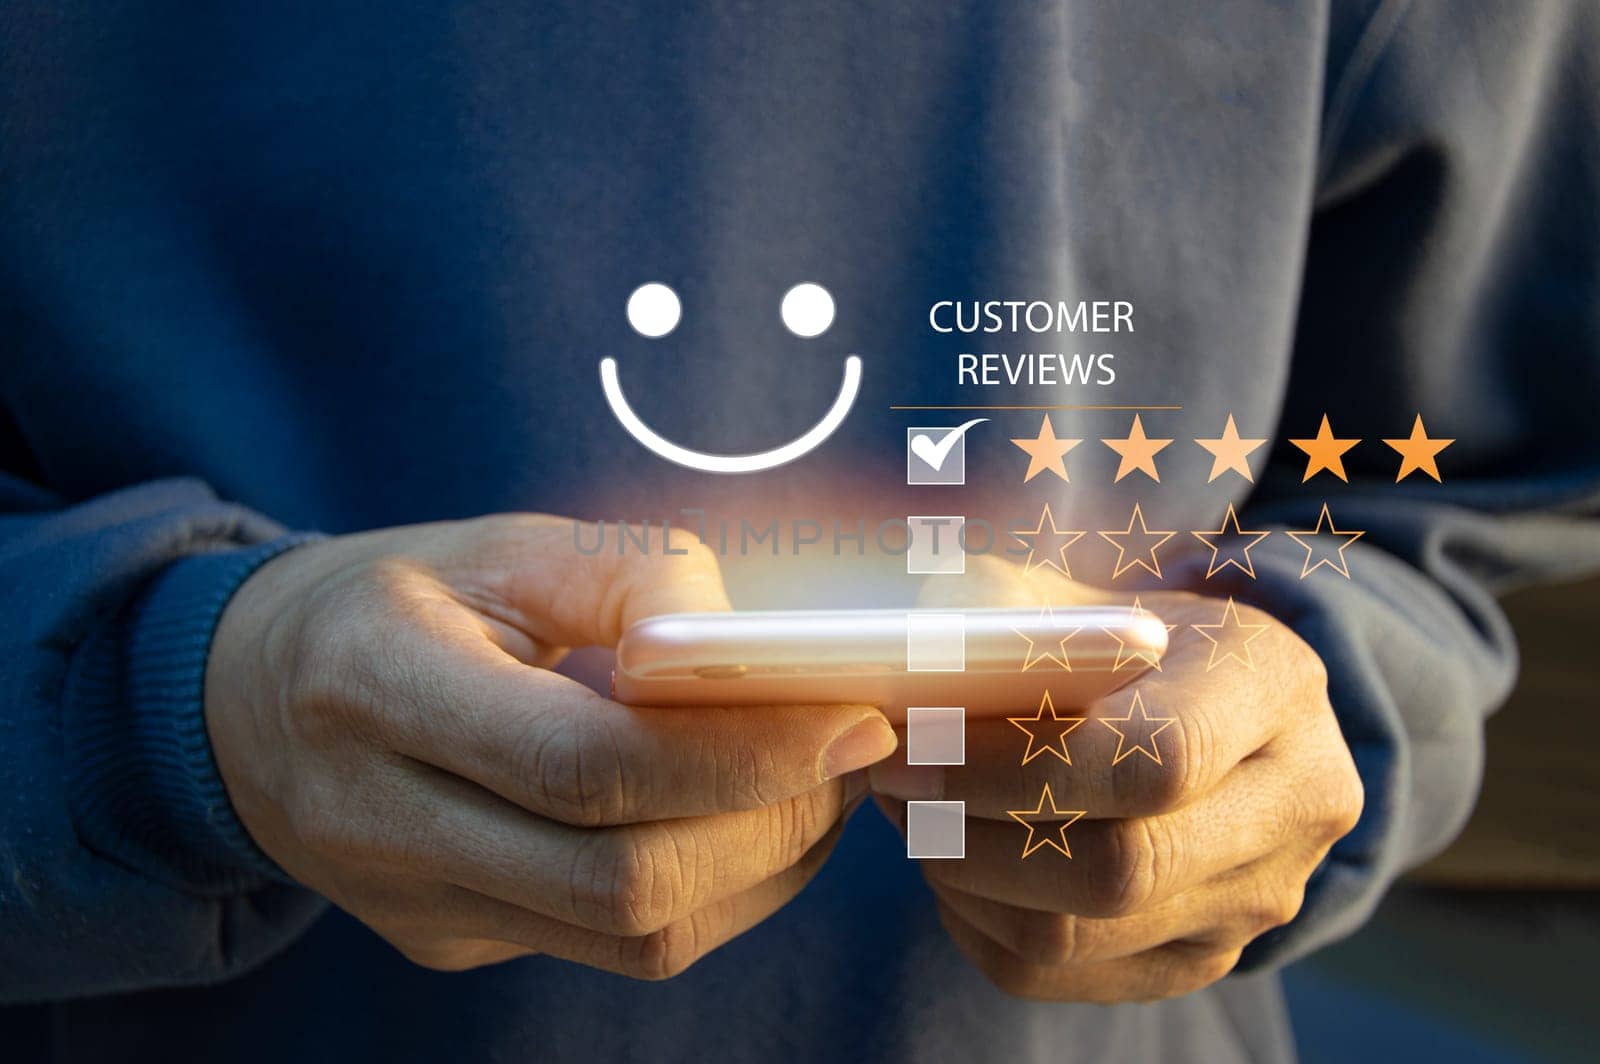 close up Man hand using smartphone with popup five star icon for feedback review satisfaction service, Customer service experience and business satisfaction survey.